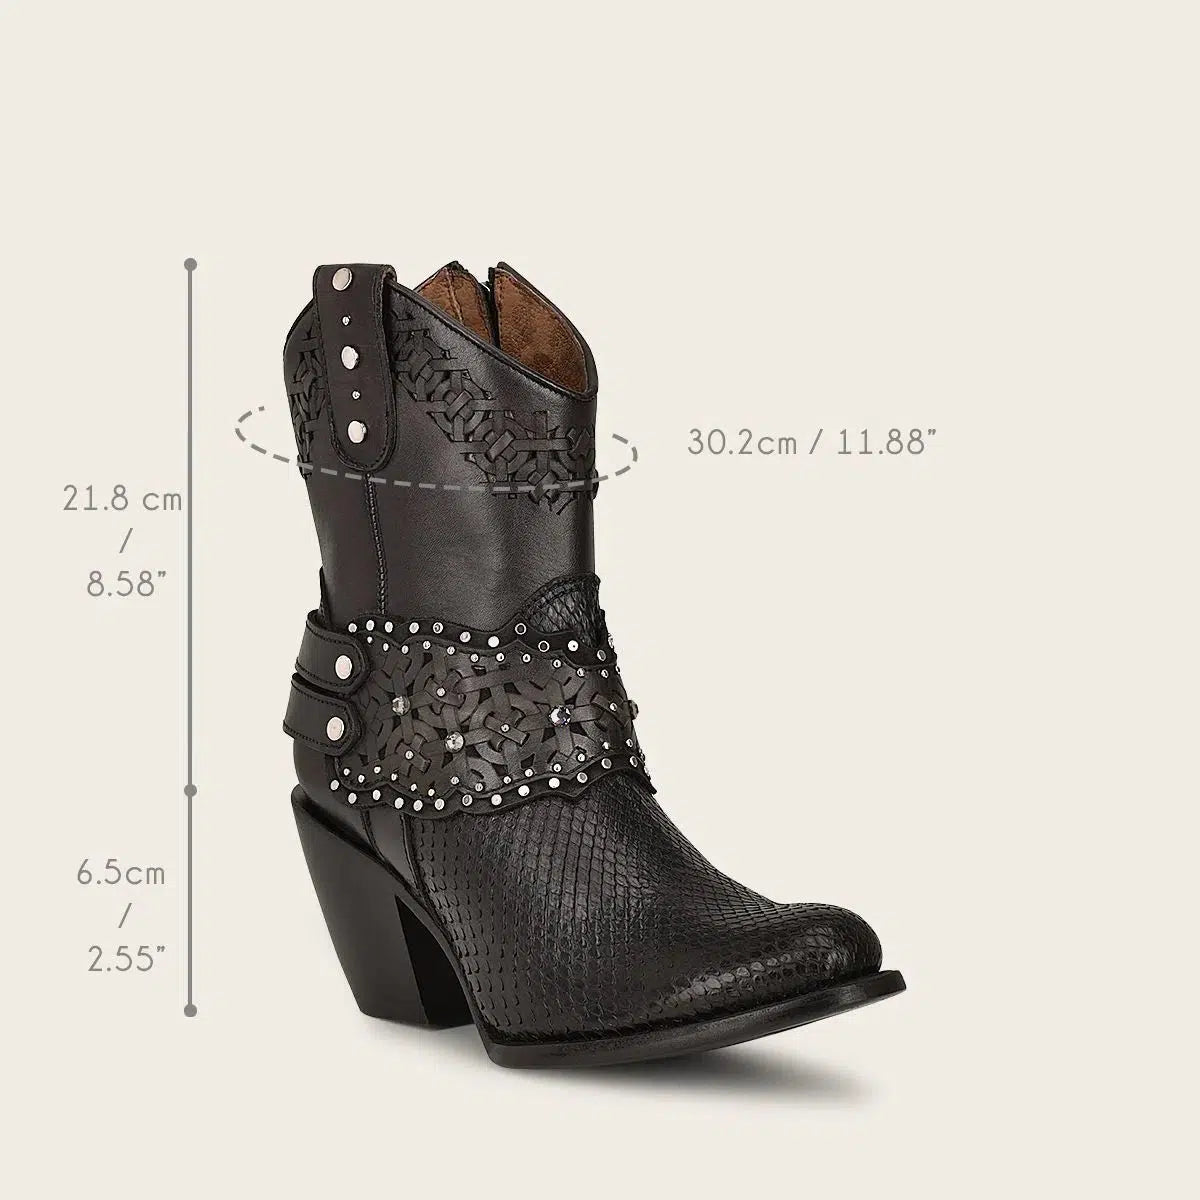 1Z42PH - Cuadra black python skin cowgirl ankle boots for women-Kuet.us